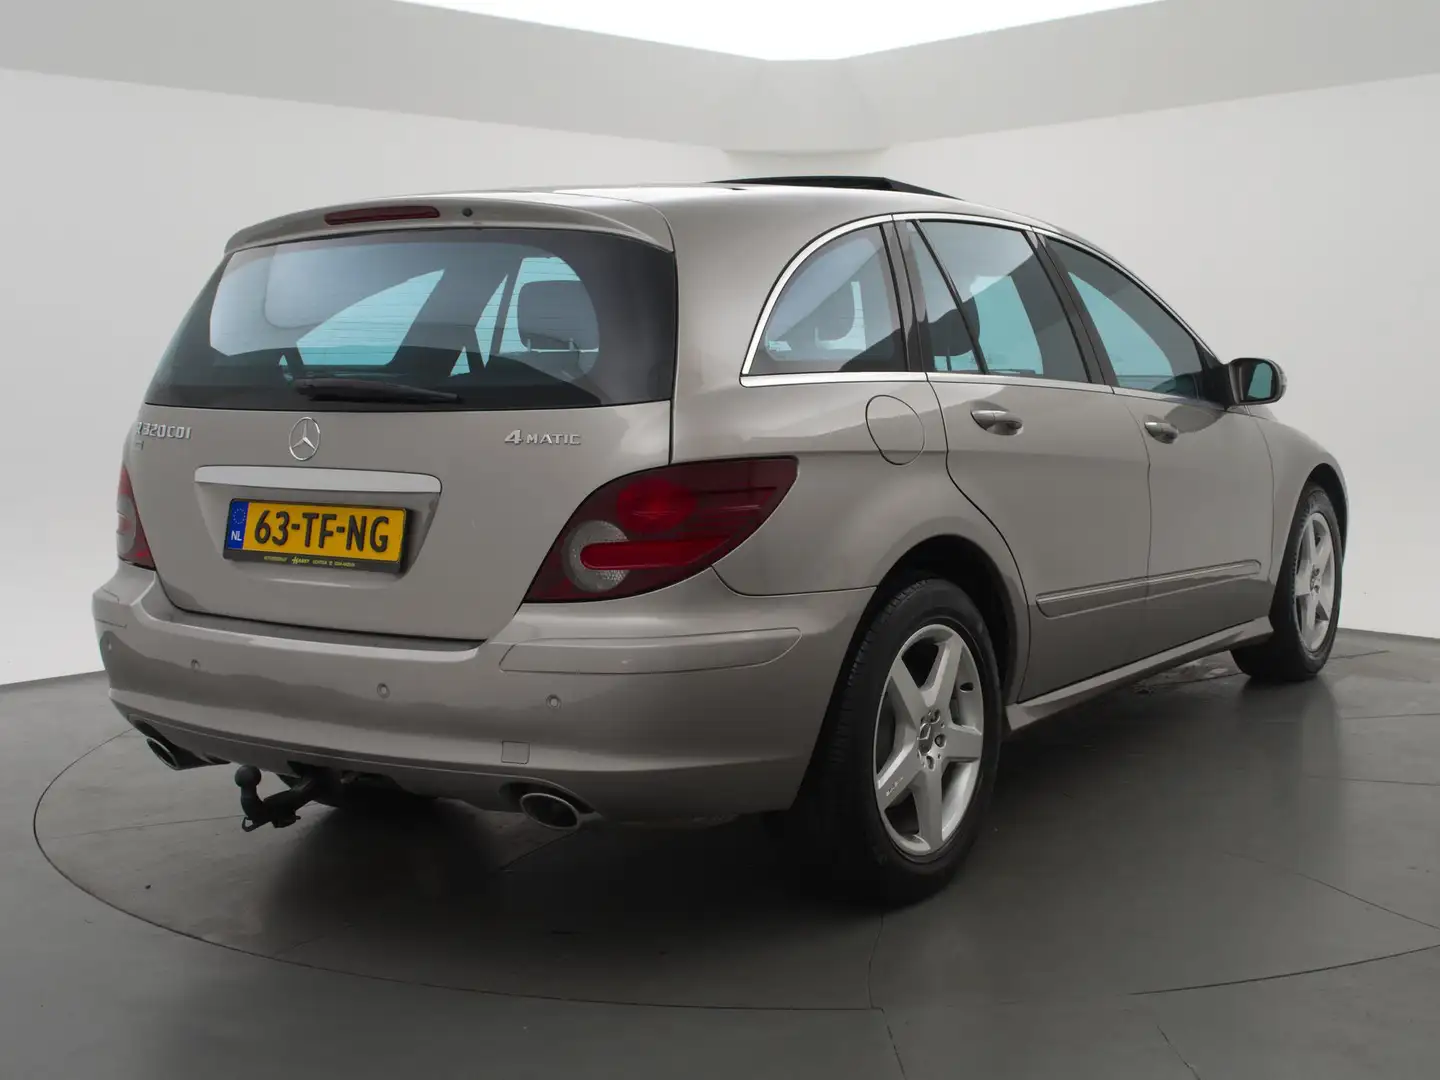 Mercedes-Benz R 320 CDI 4-MATIC 6-PERS. *184.762 KM* YOUNGTIMER Szary - 2